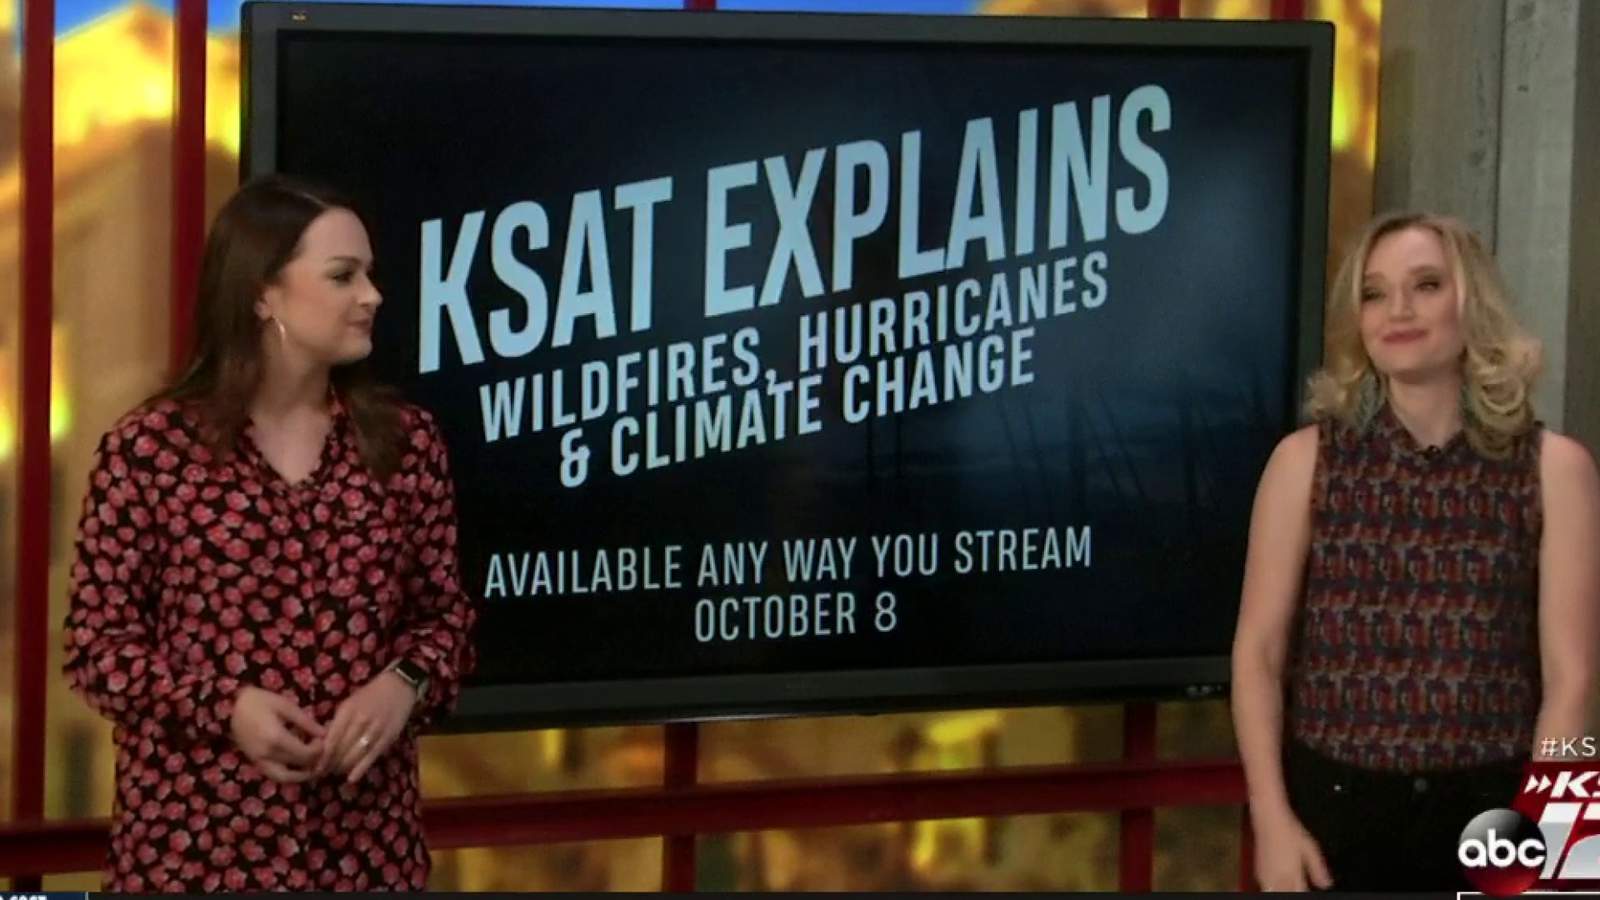 GMSA@9 Debrief: 'KSAT Explains' looks at role climate change has played in wildfires and hurricane season